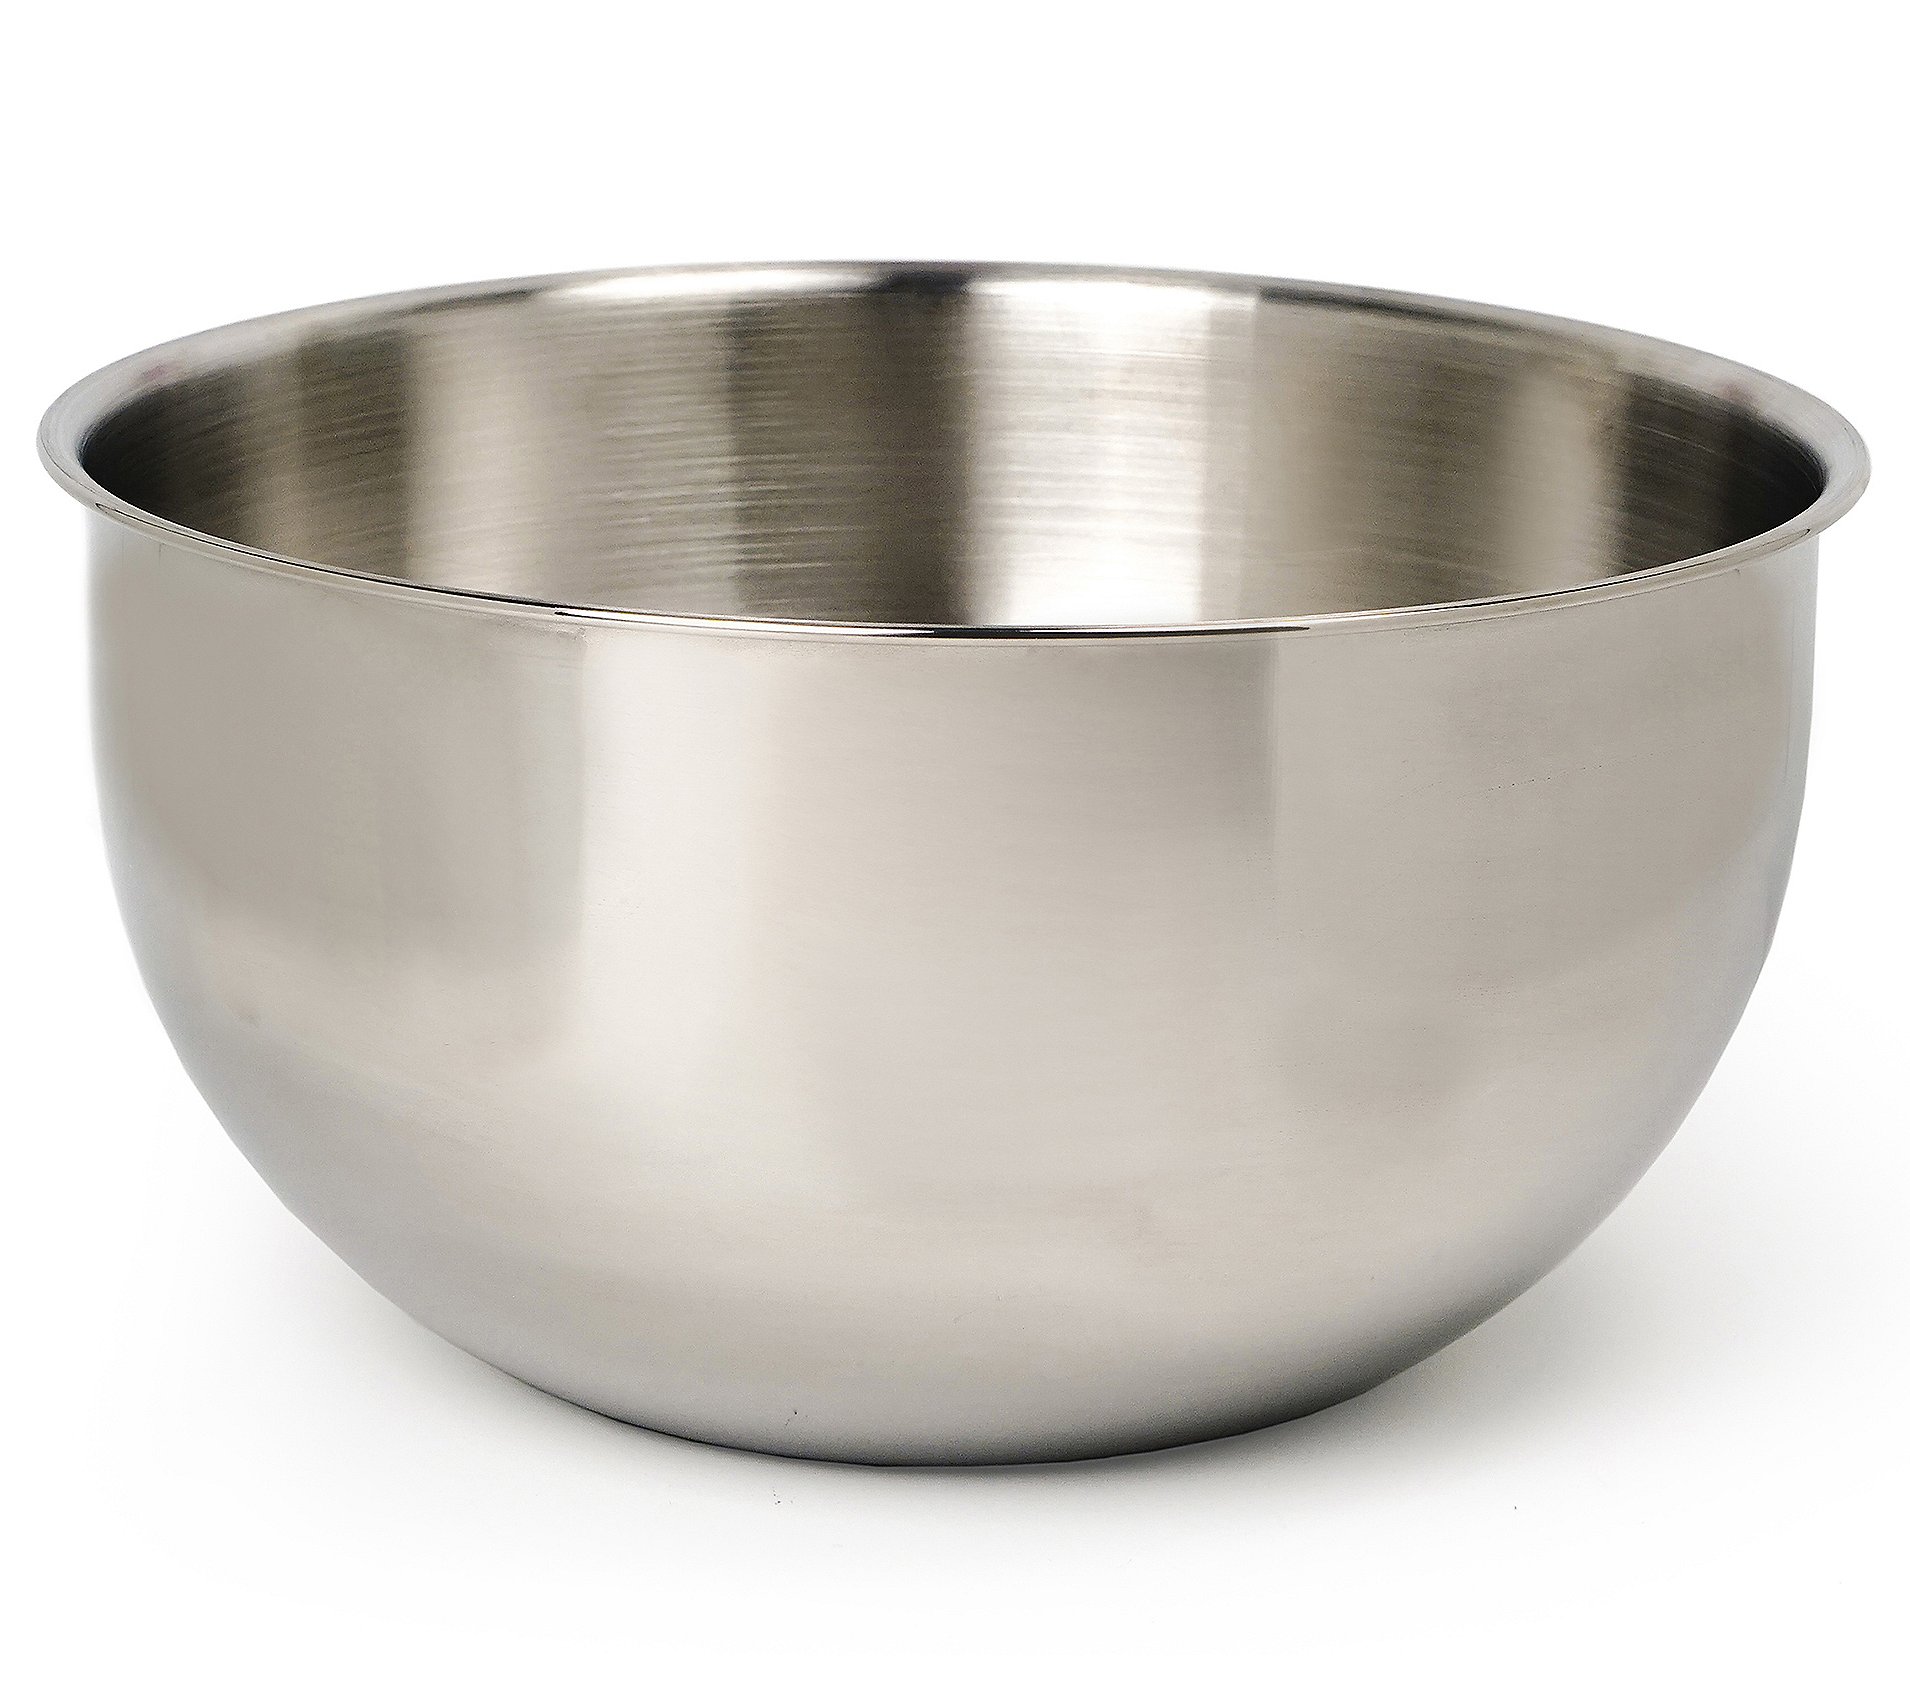 RSVP 12 Qt. Stainless Steel Mixing Bowl